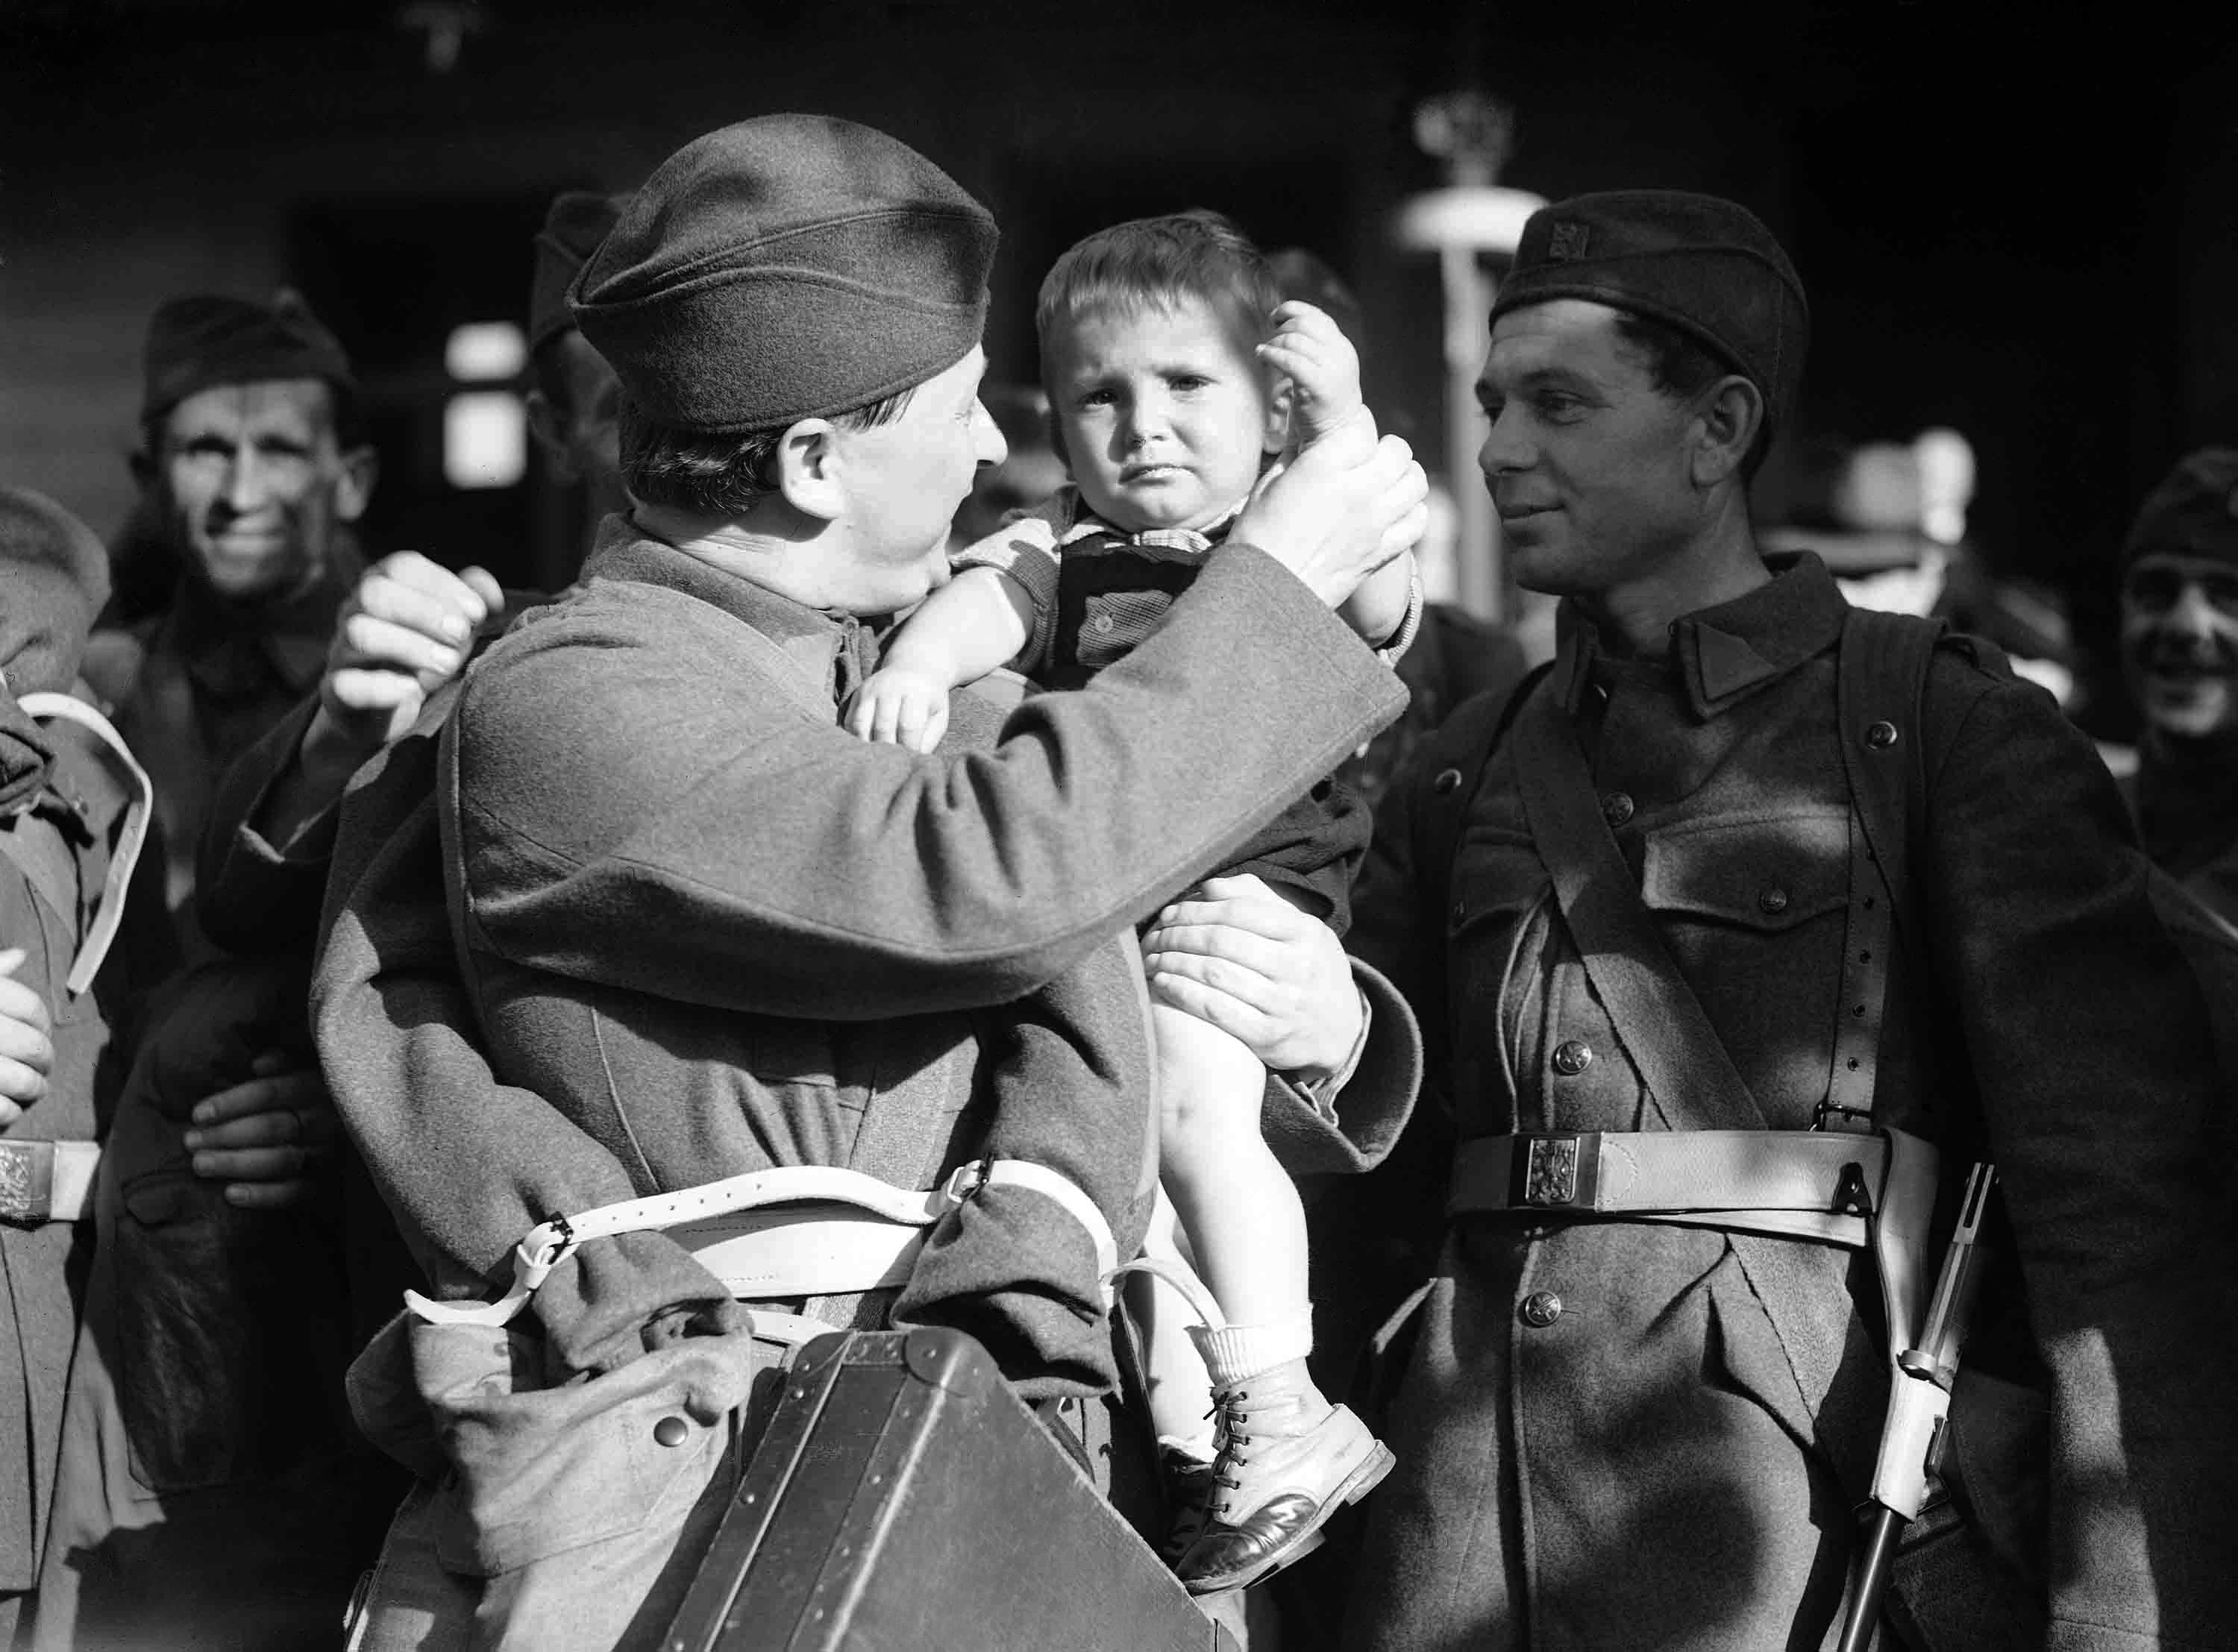 General mobilization resulted in Czech troops marching through Prague to entrain for frontier posts. A soldier at the Dennis Station in Prague, Czechoslovakia, on Sept. 26, 1938, waiting to entrain for the frontier forces a cheerful smile as he says goodbye to the son he holds in his arms. (AP Photo)